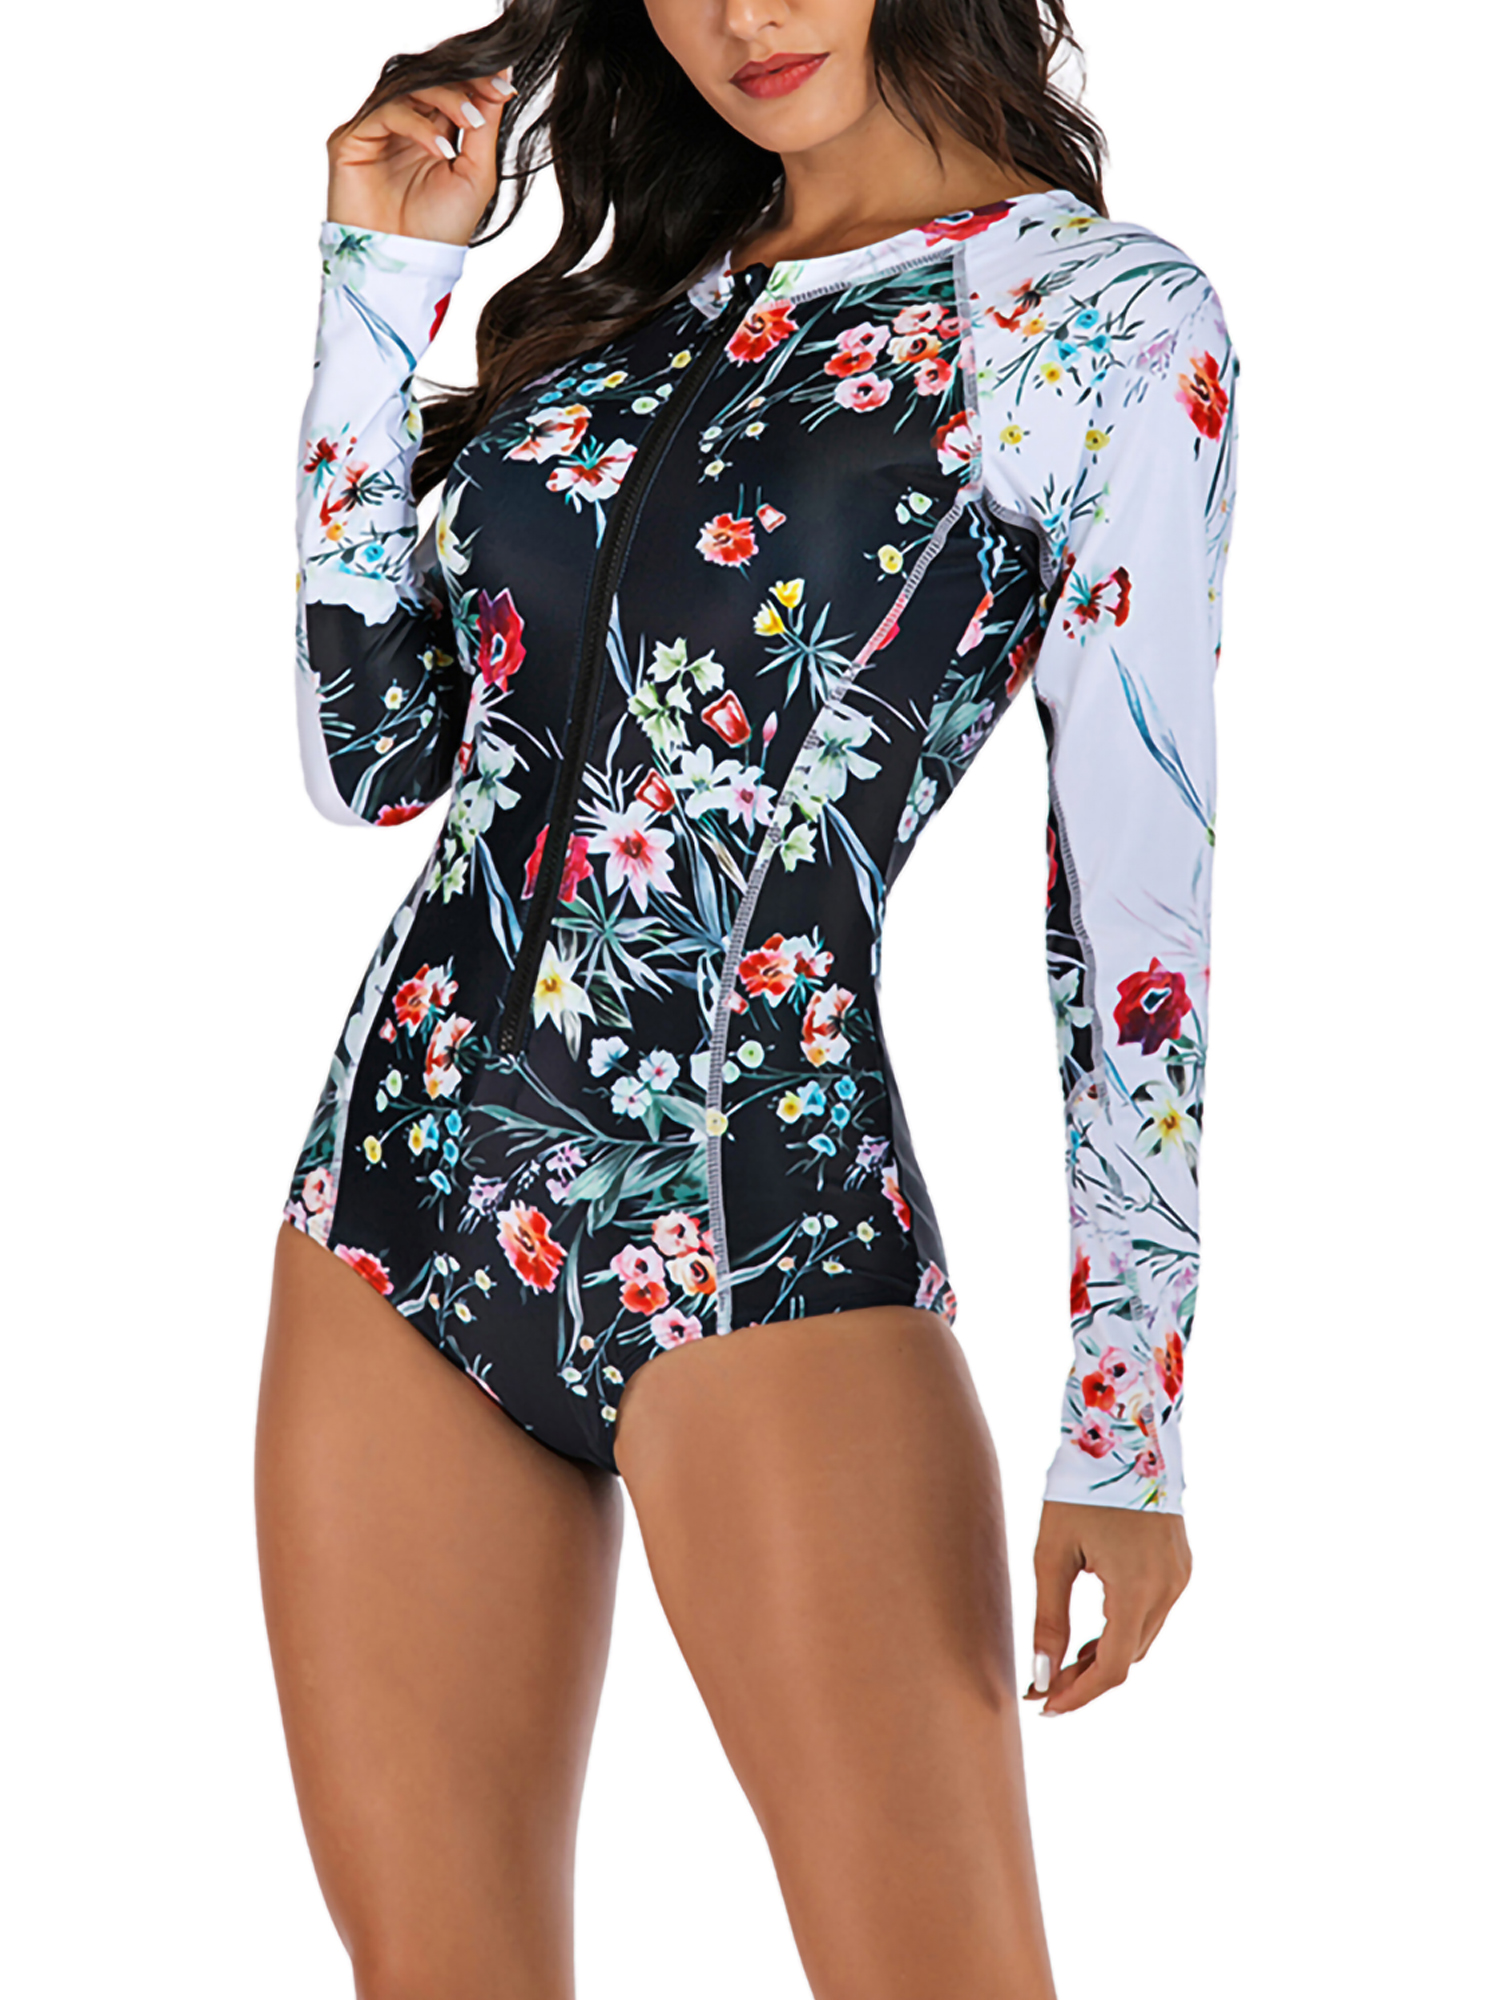 Long Sleeve One-piece Swimsuits for Women Surfing Diving Suit Bathing Suits Sexy Ladies S-2XL Floral Tummy Control - image 5 of 8